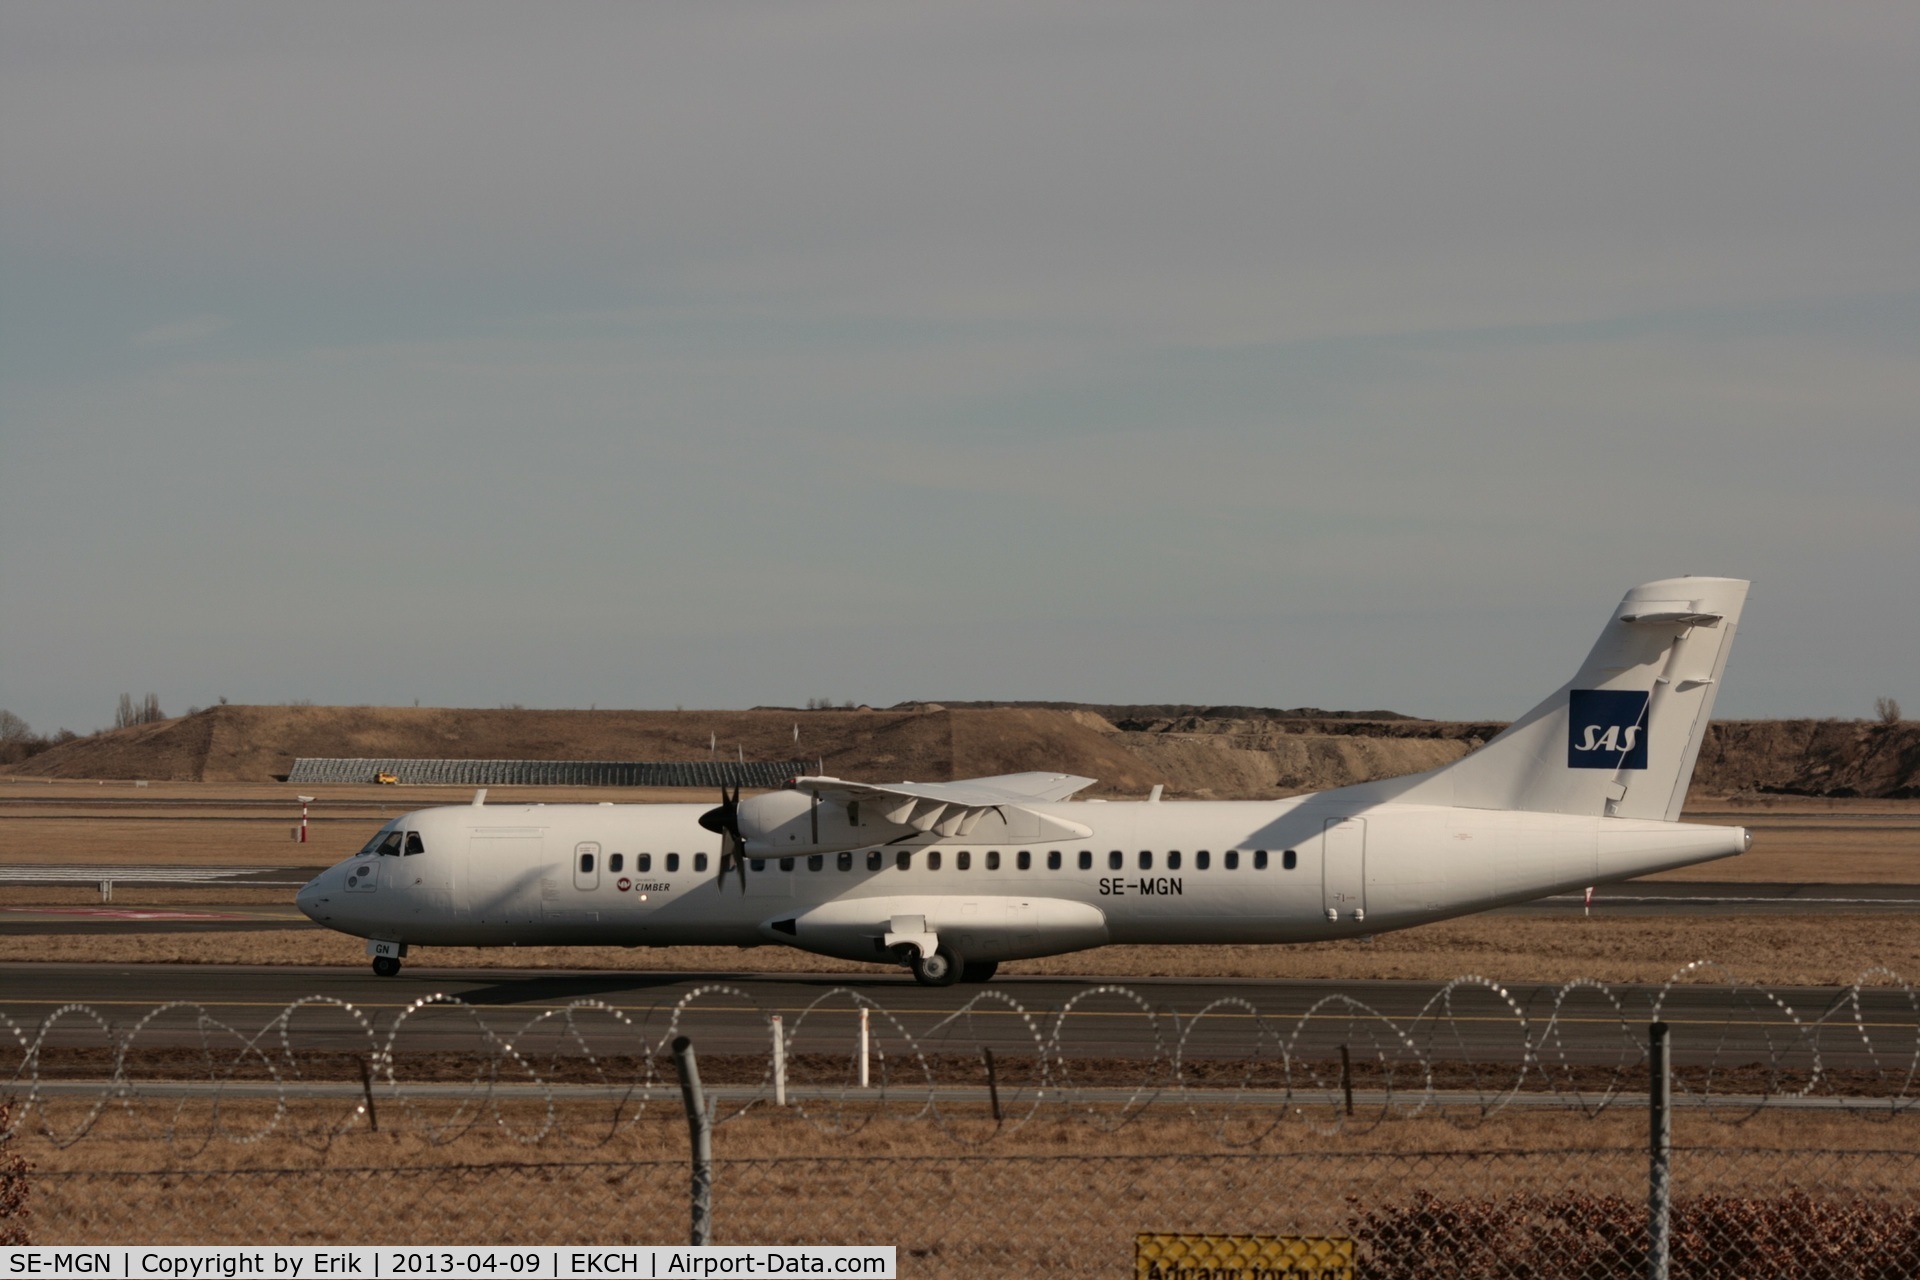 SE-MGN, 1994 ATR 72-202 C/N 437, By Erik Oxtorp, SE-MGN operated by Cimber on behalf of SAS on Danish Domestic flights